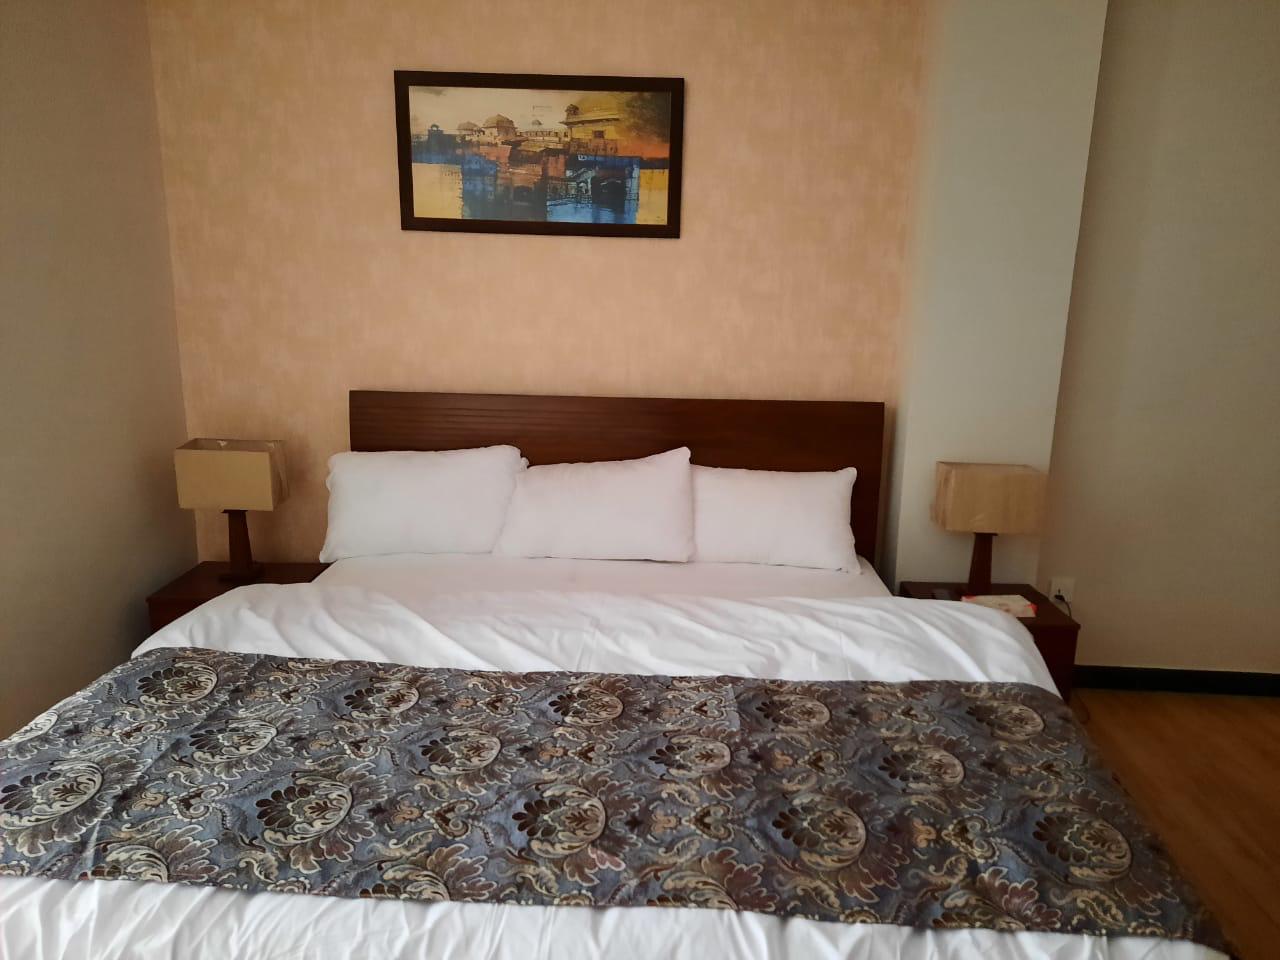 Hotel in Naran with double bed room